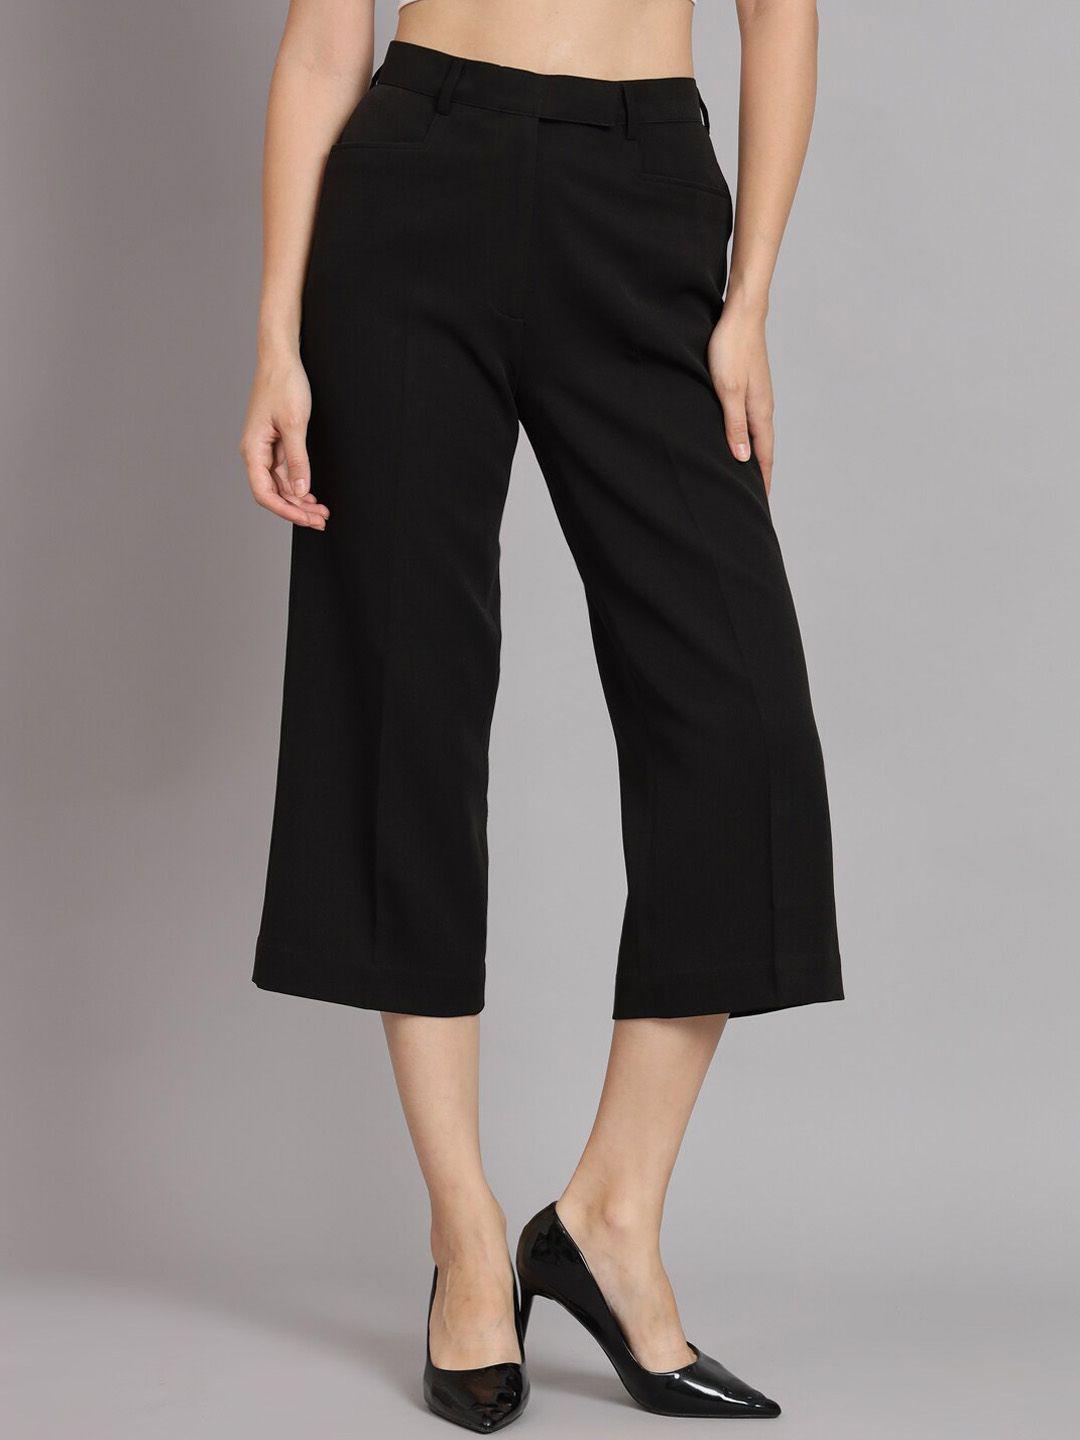 powersutra-women-mid-rise-culottes-trousers